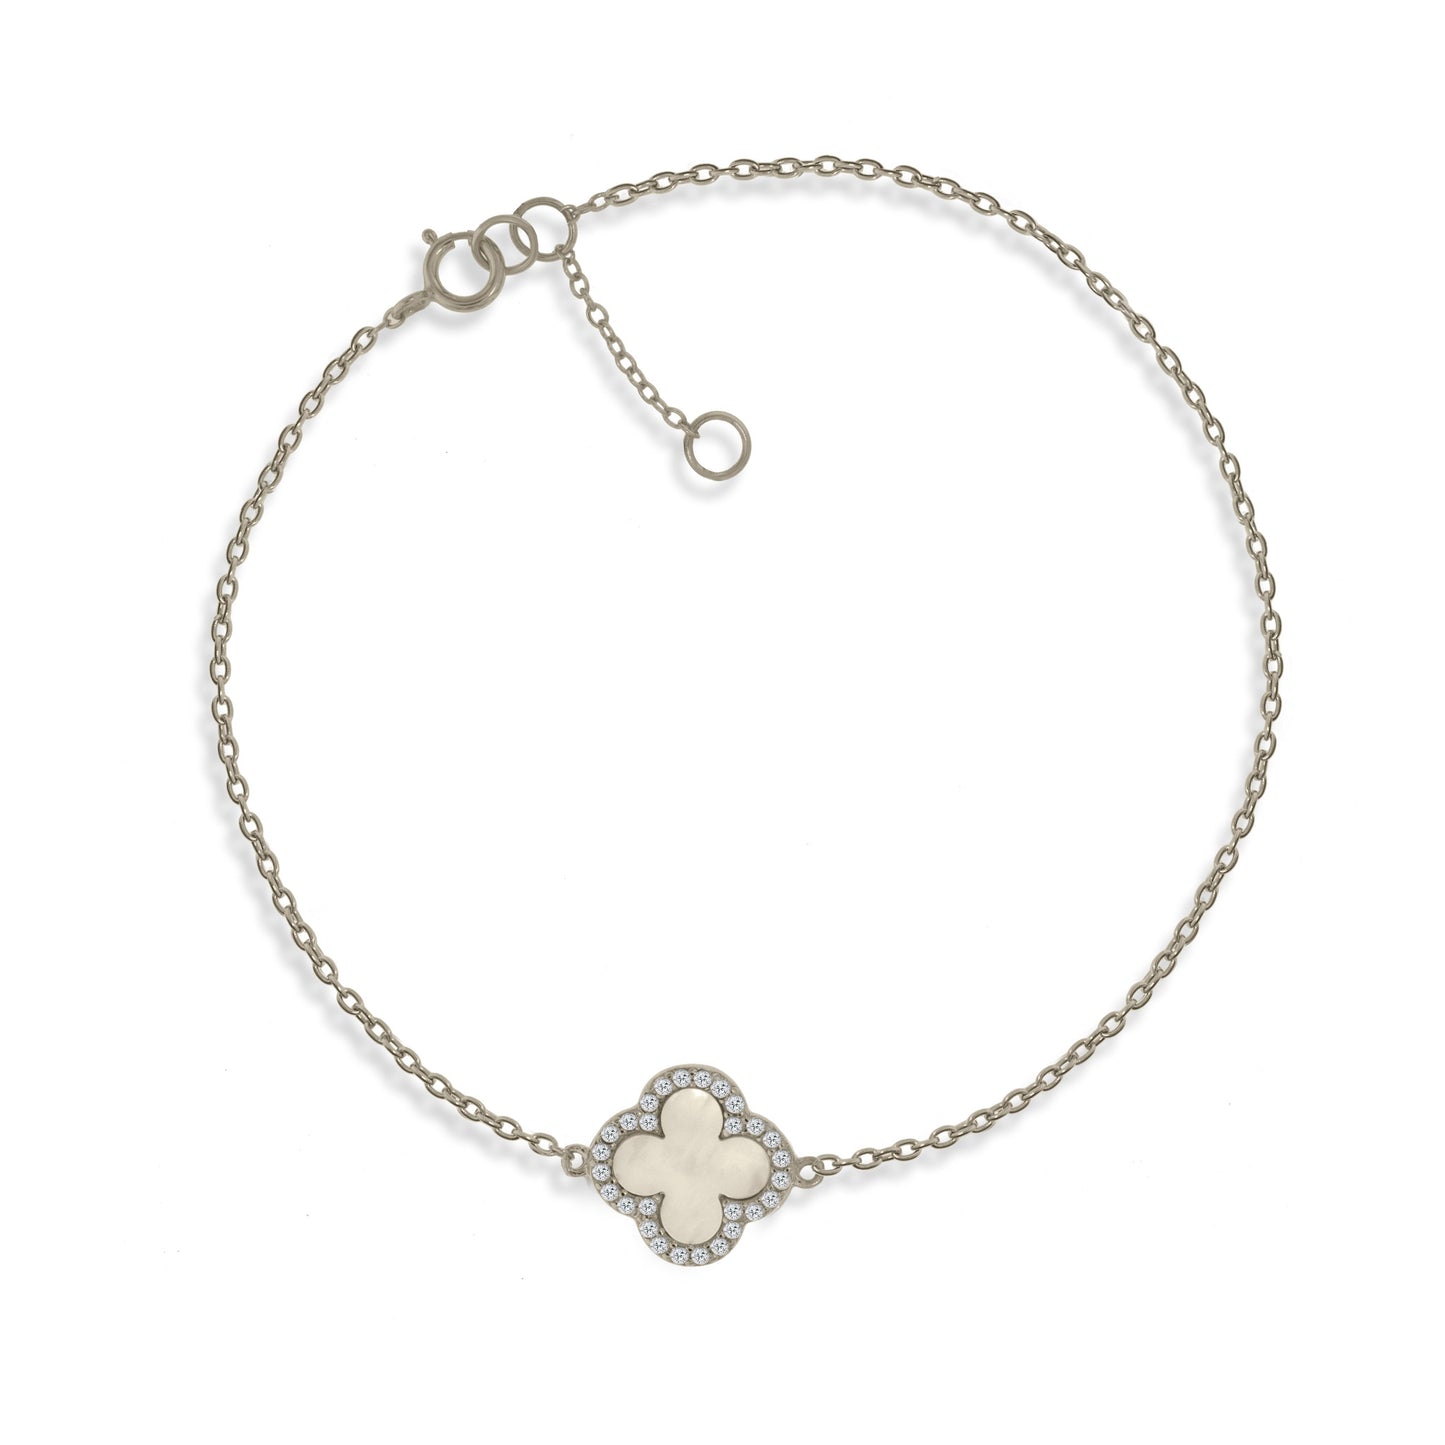 BG-5/S - Sterling Silver Chain Bracelet with Mother of Pearl Clover Charm